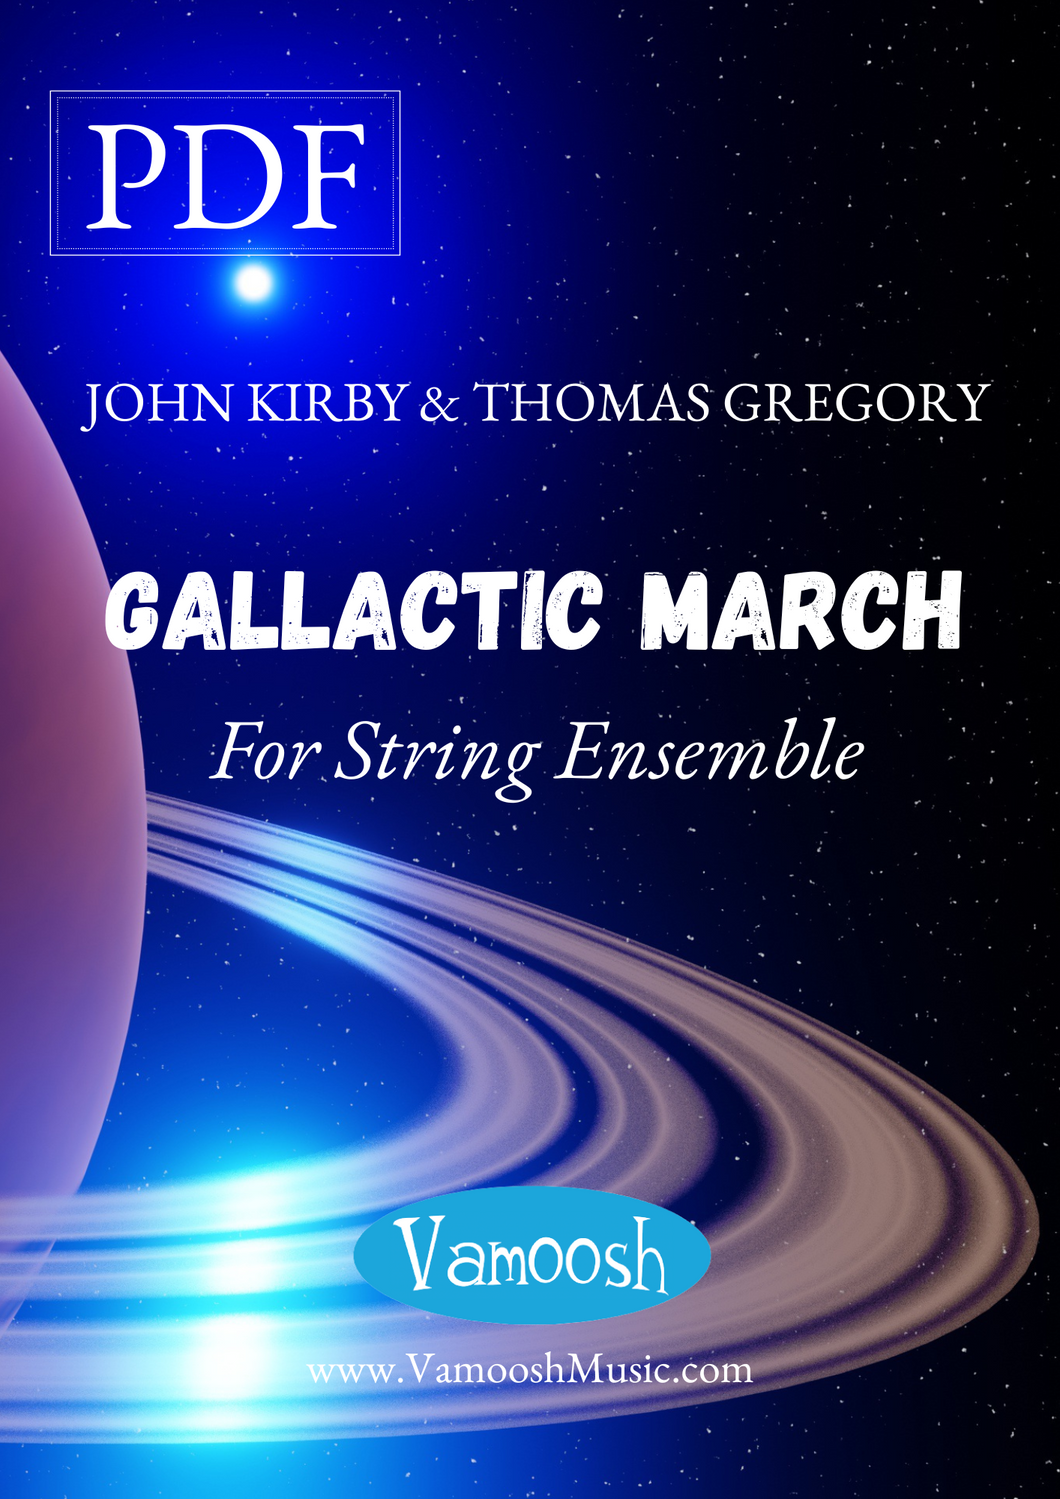 Gallactic March by Thomas Gregory